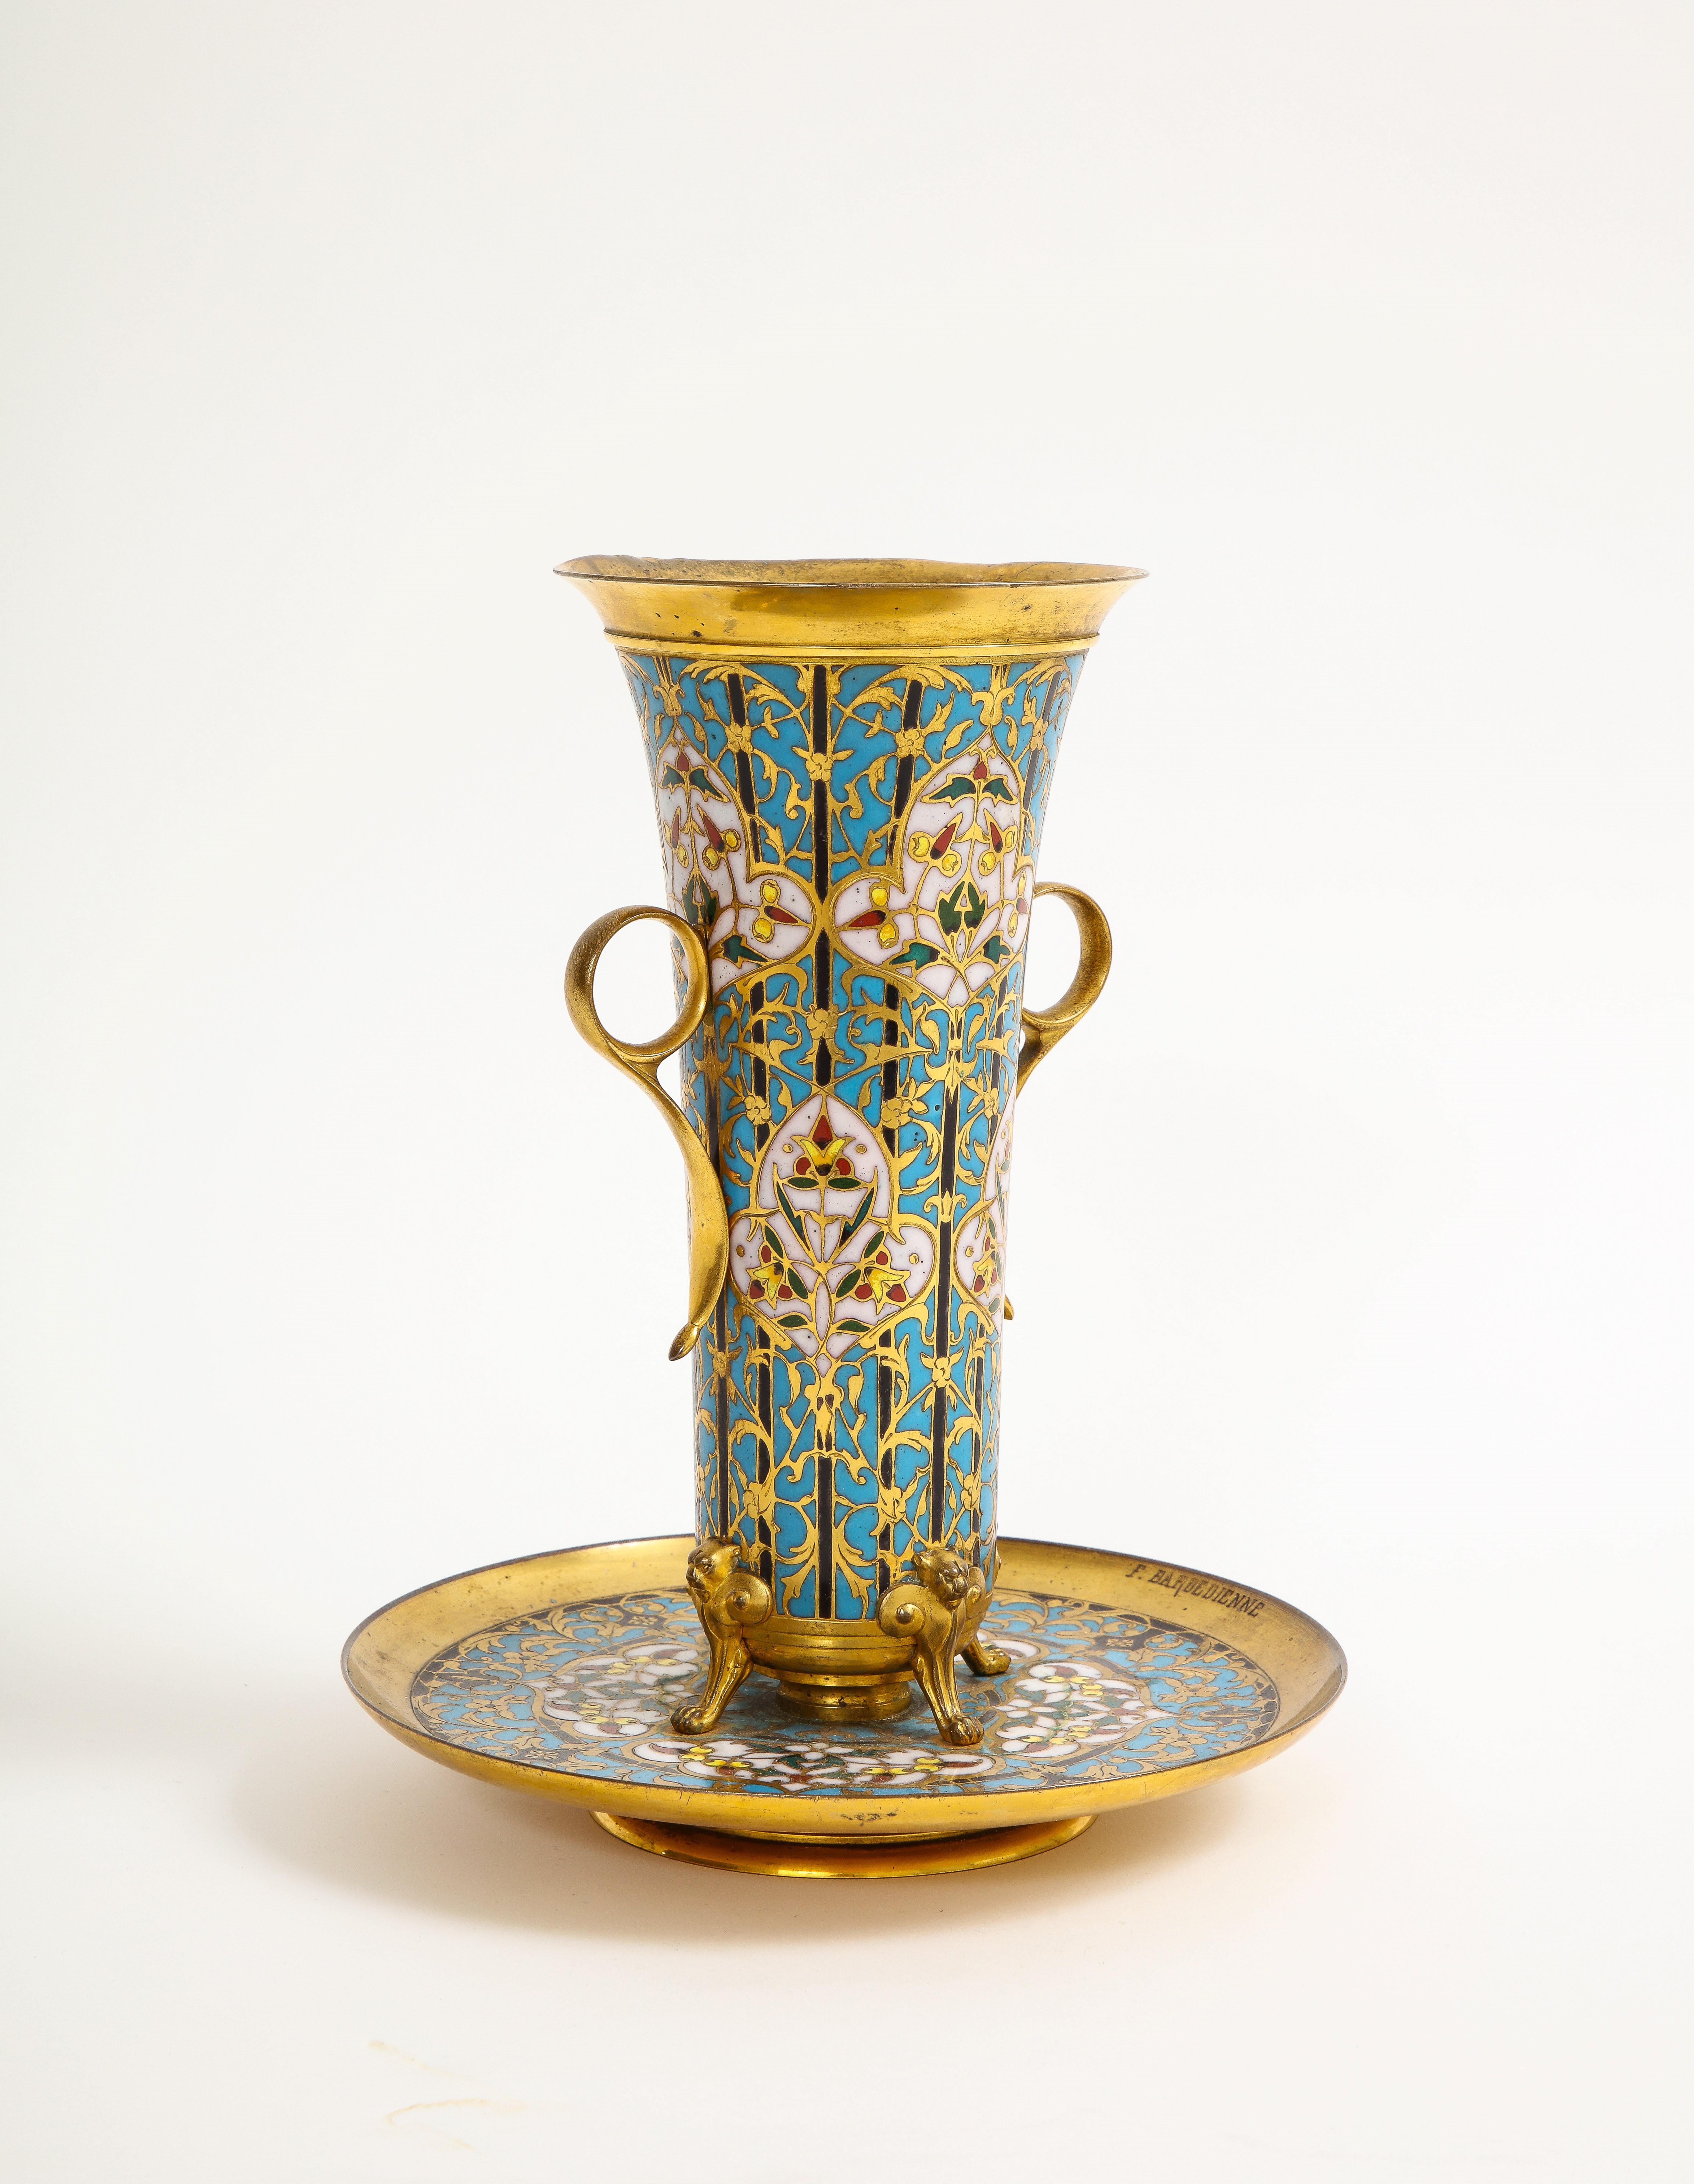 Enameled 19th C. French Islamic Champleve Enamel Vase and Underplate, Signed Barbedienne For Sale